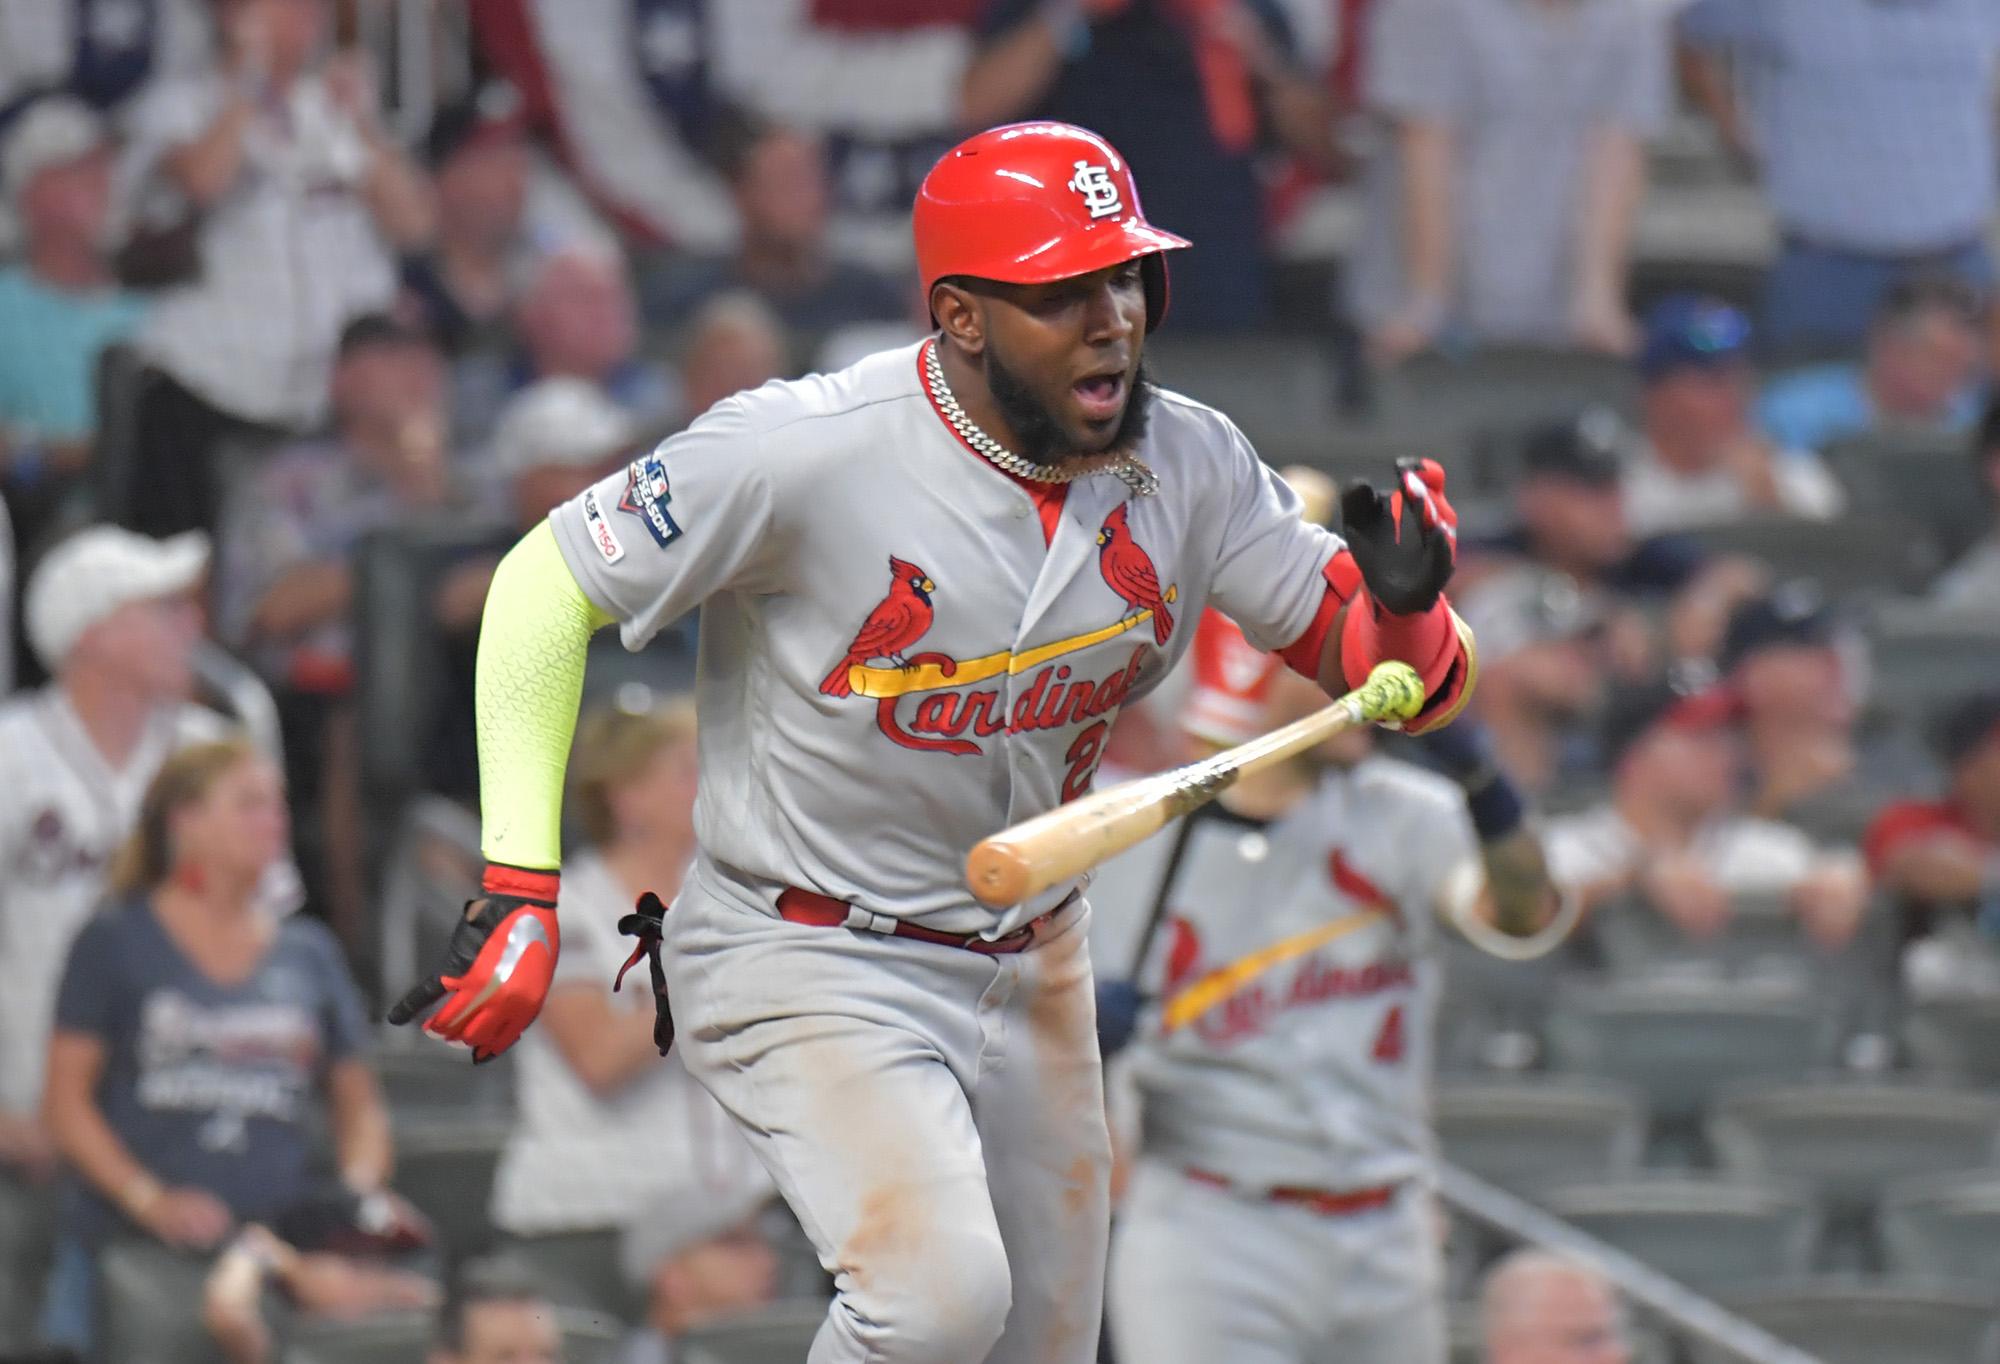 The St. Louis Cardinals Marcell Ozuna hits a two-run single in the ninth inning against the Atlanta Braves during Game 1 of the National League Division Series at SunTrust Park in Atlanta on Thursday, Oct. 3, 2019. St. Louis won, 7-6. (Hyosub Shin/Atlanta Journal-Constitution/TNS)